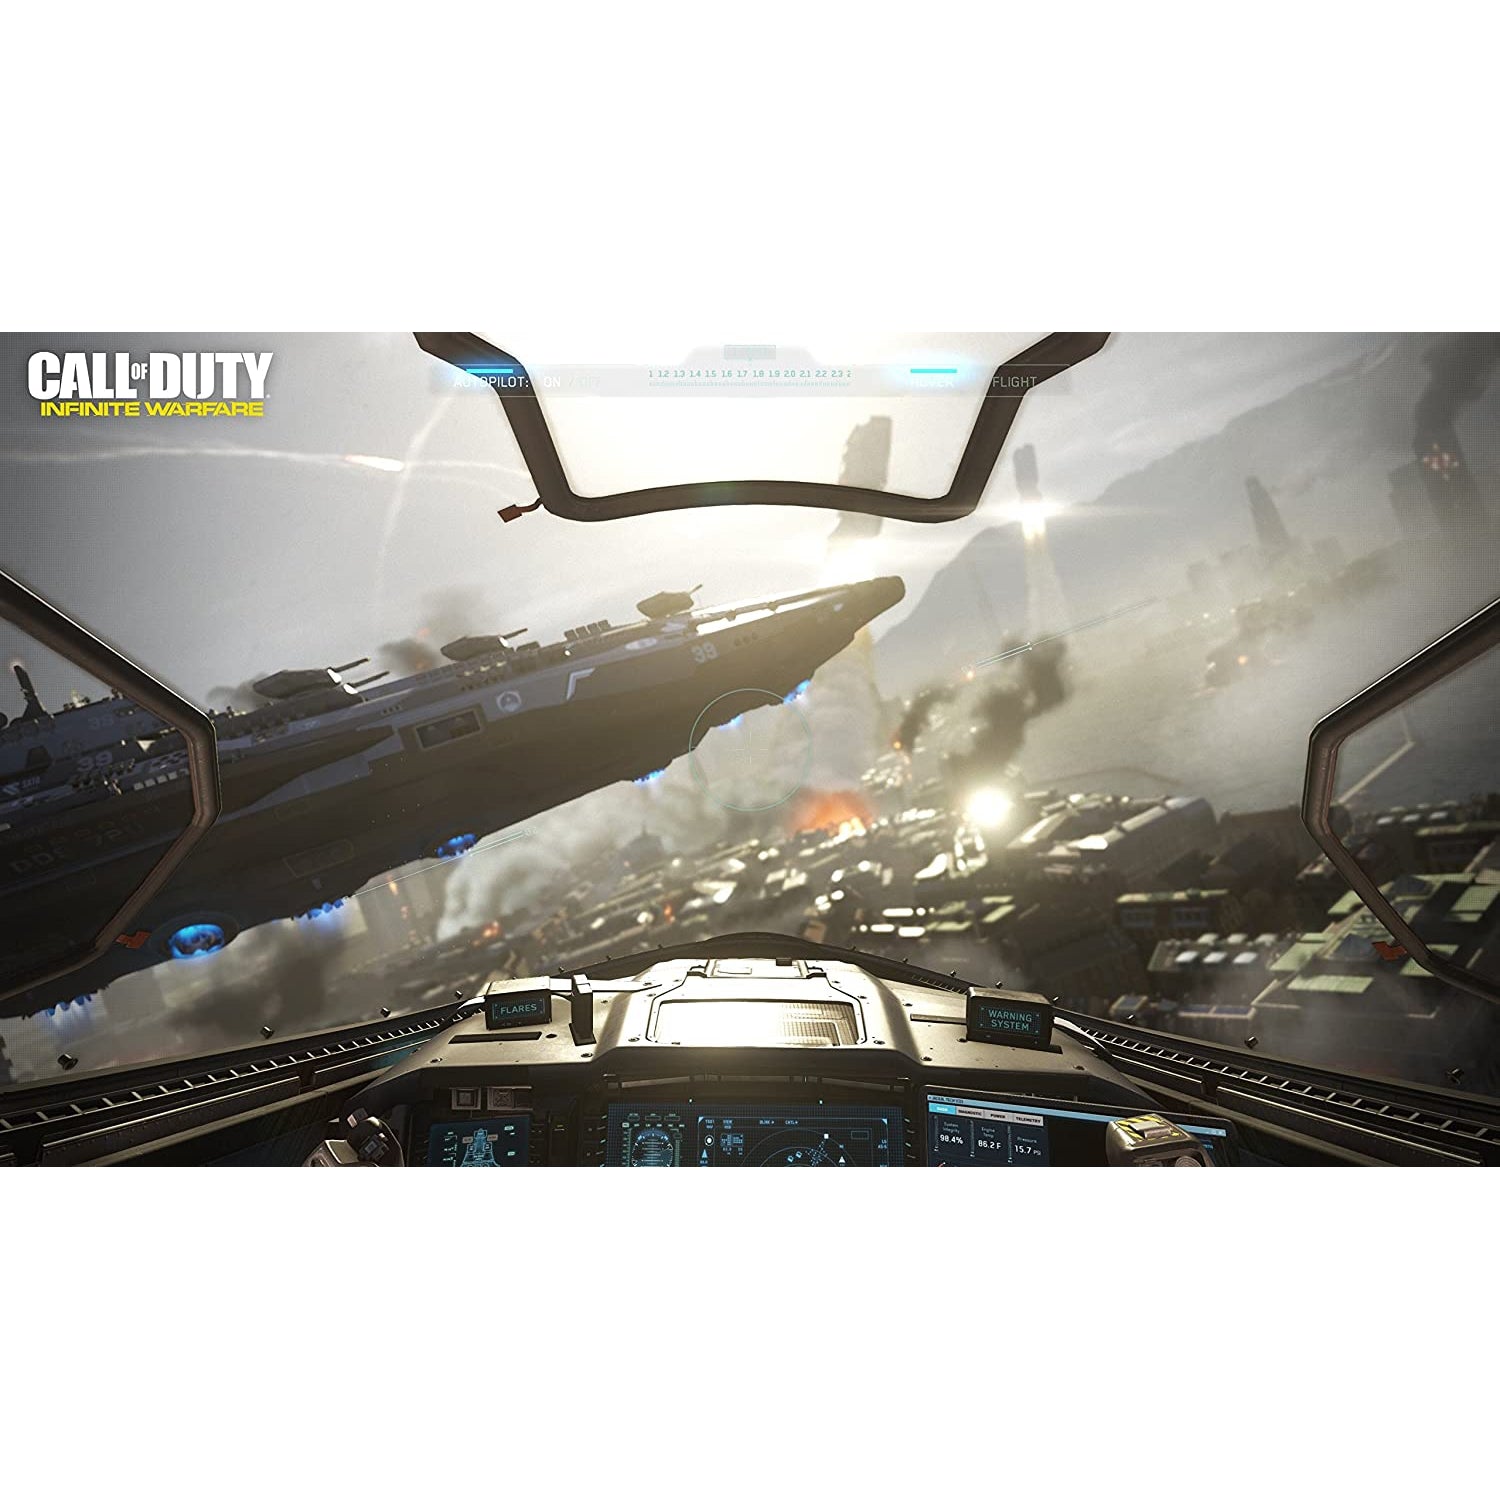 Call Of Duty: Infinite Warfare (PS4) - Refurbished Excellent